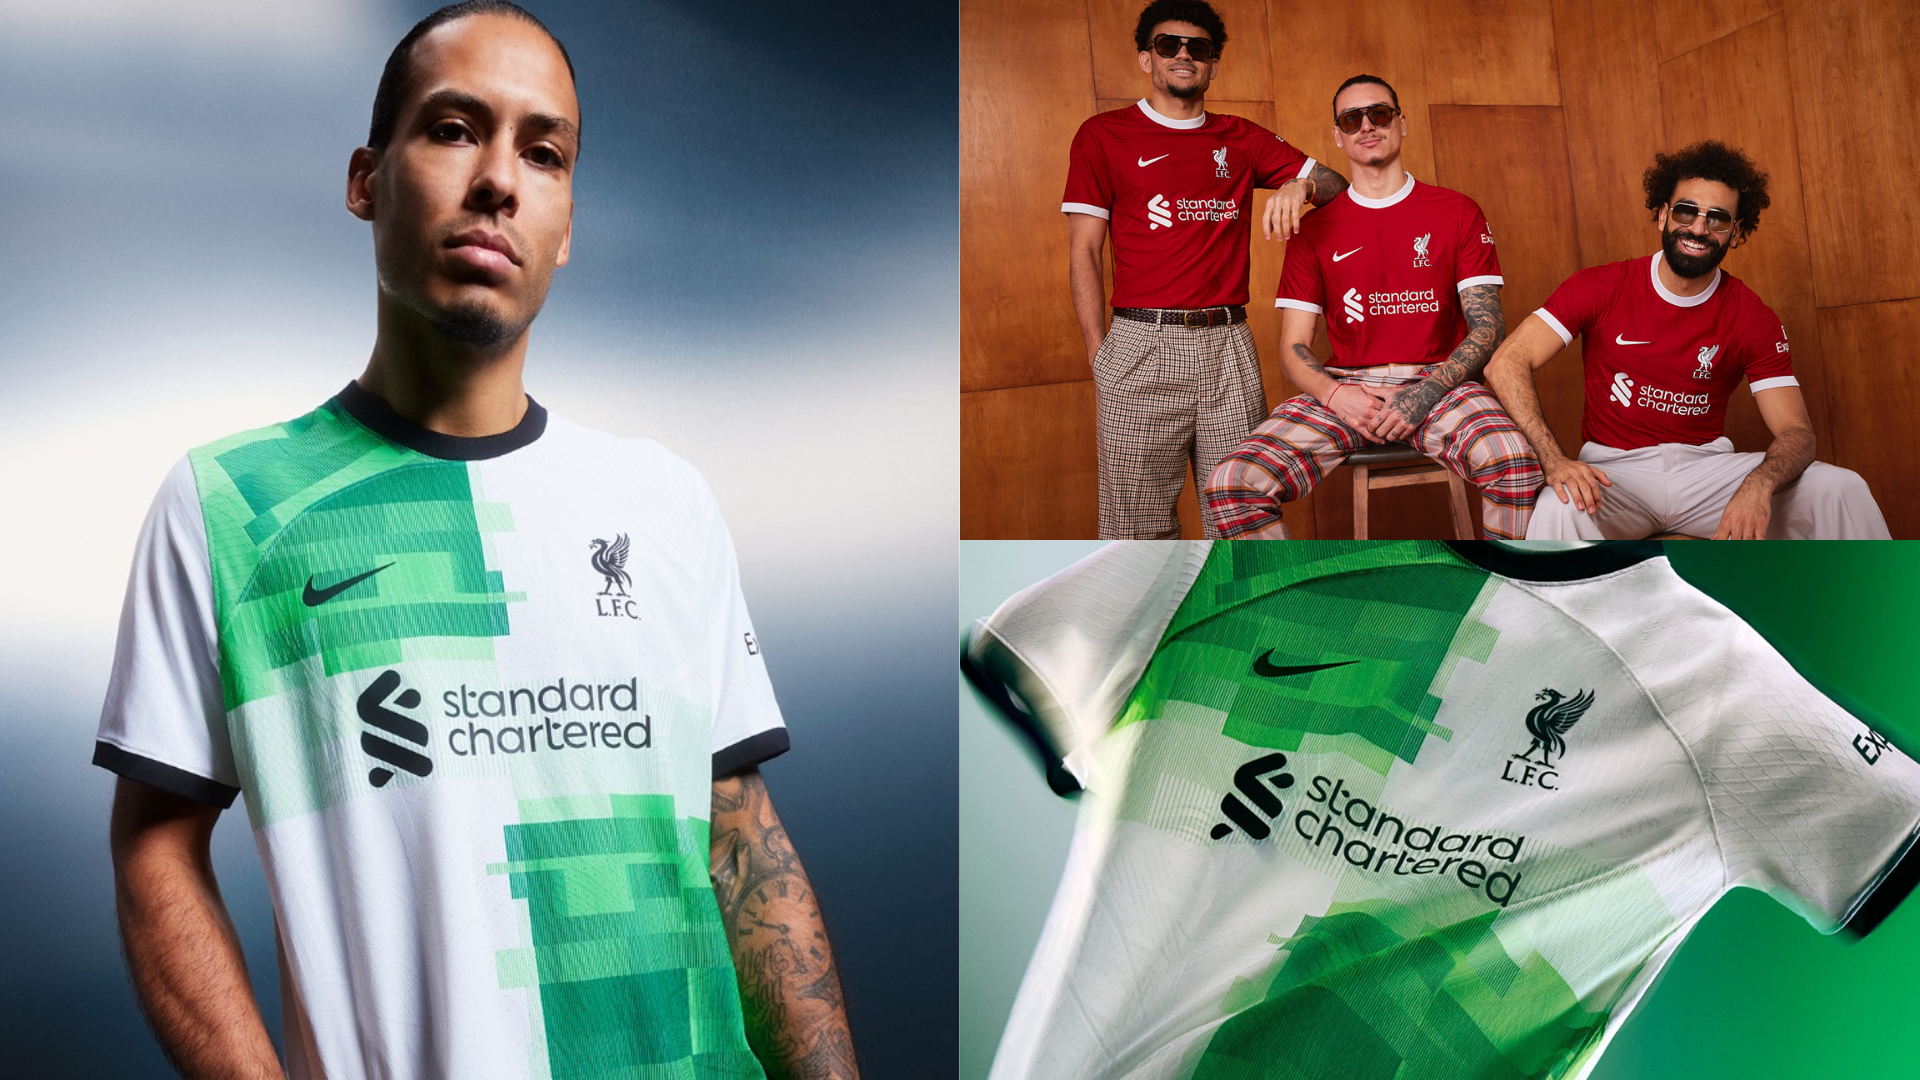 liverpool home and away jersey